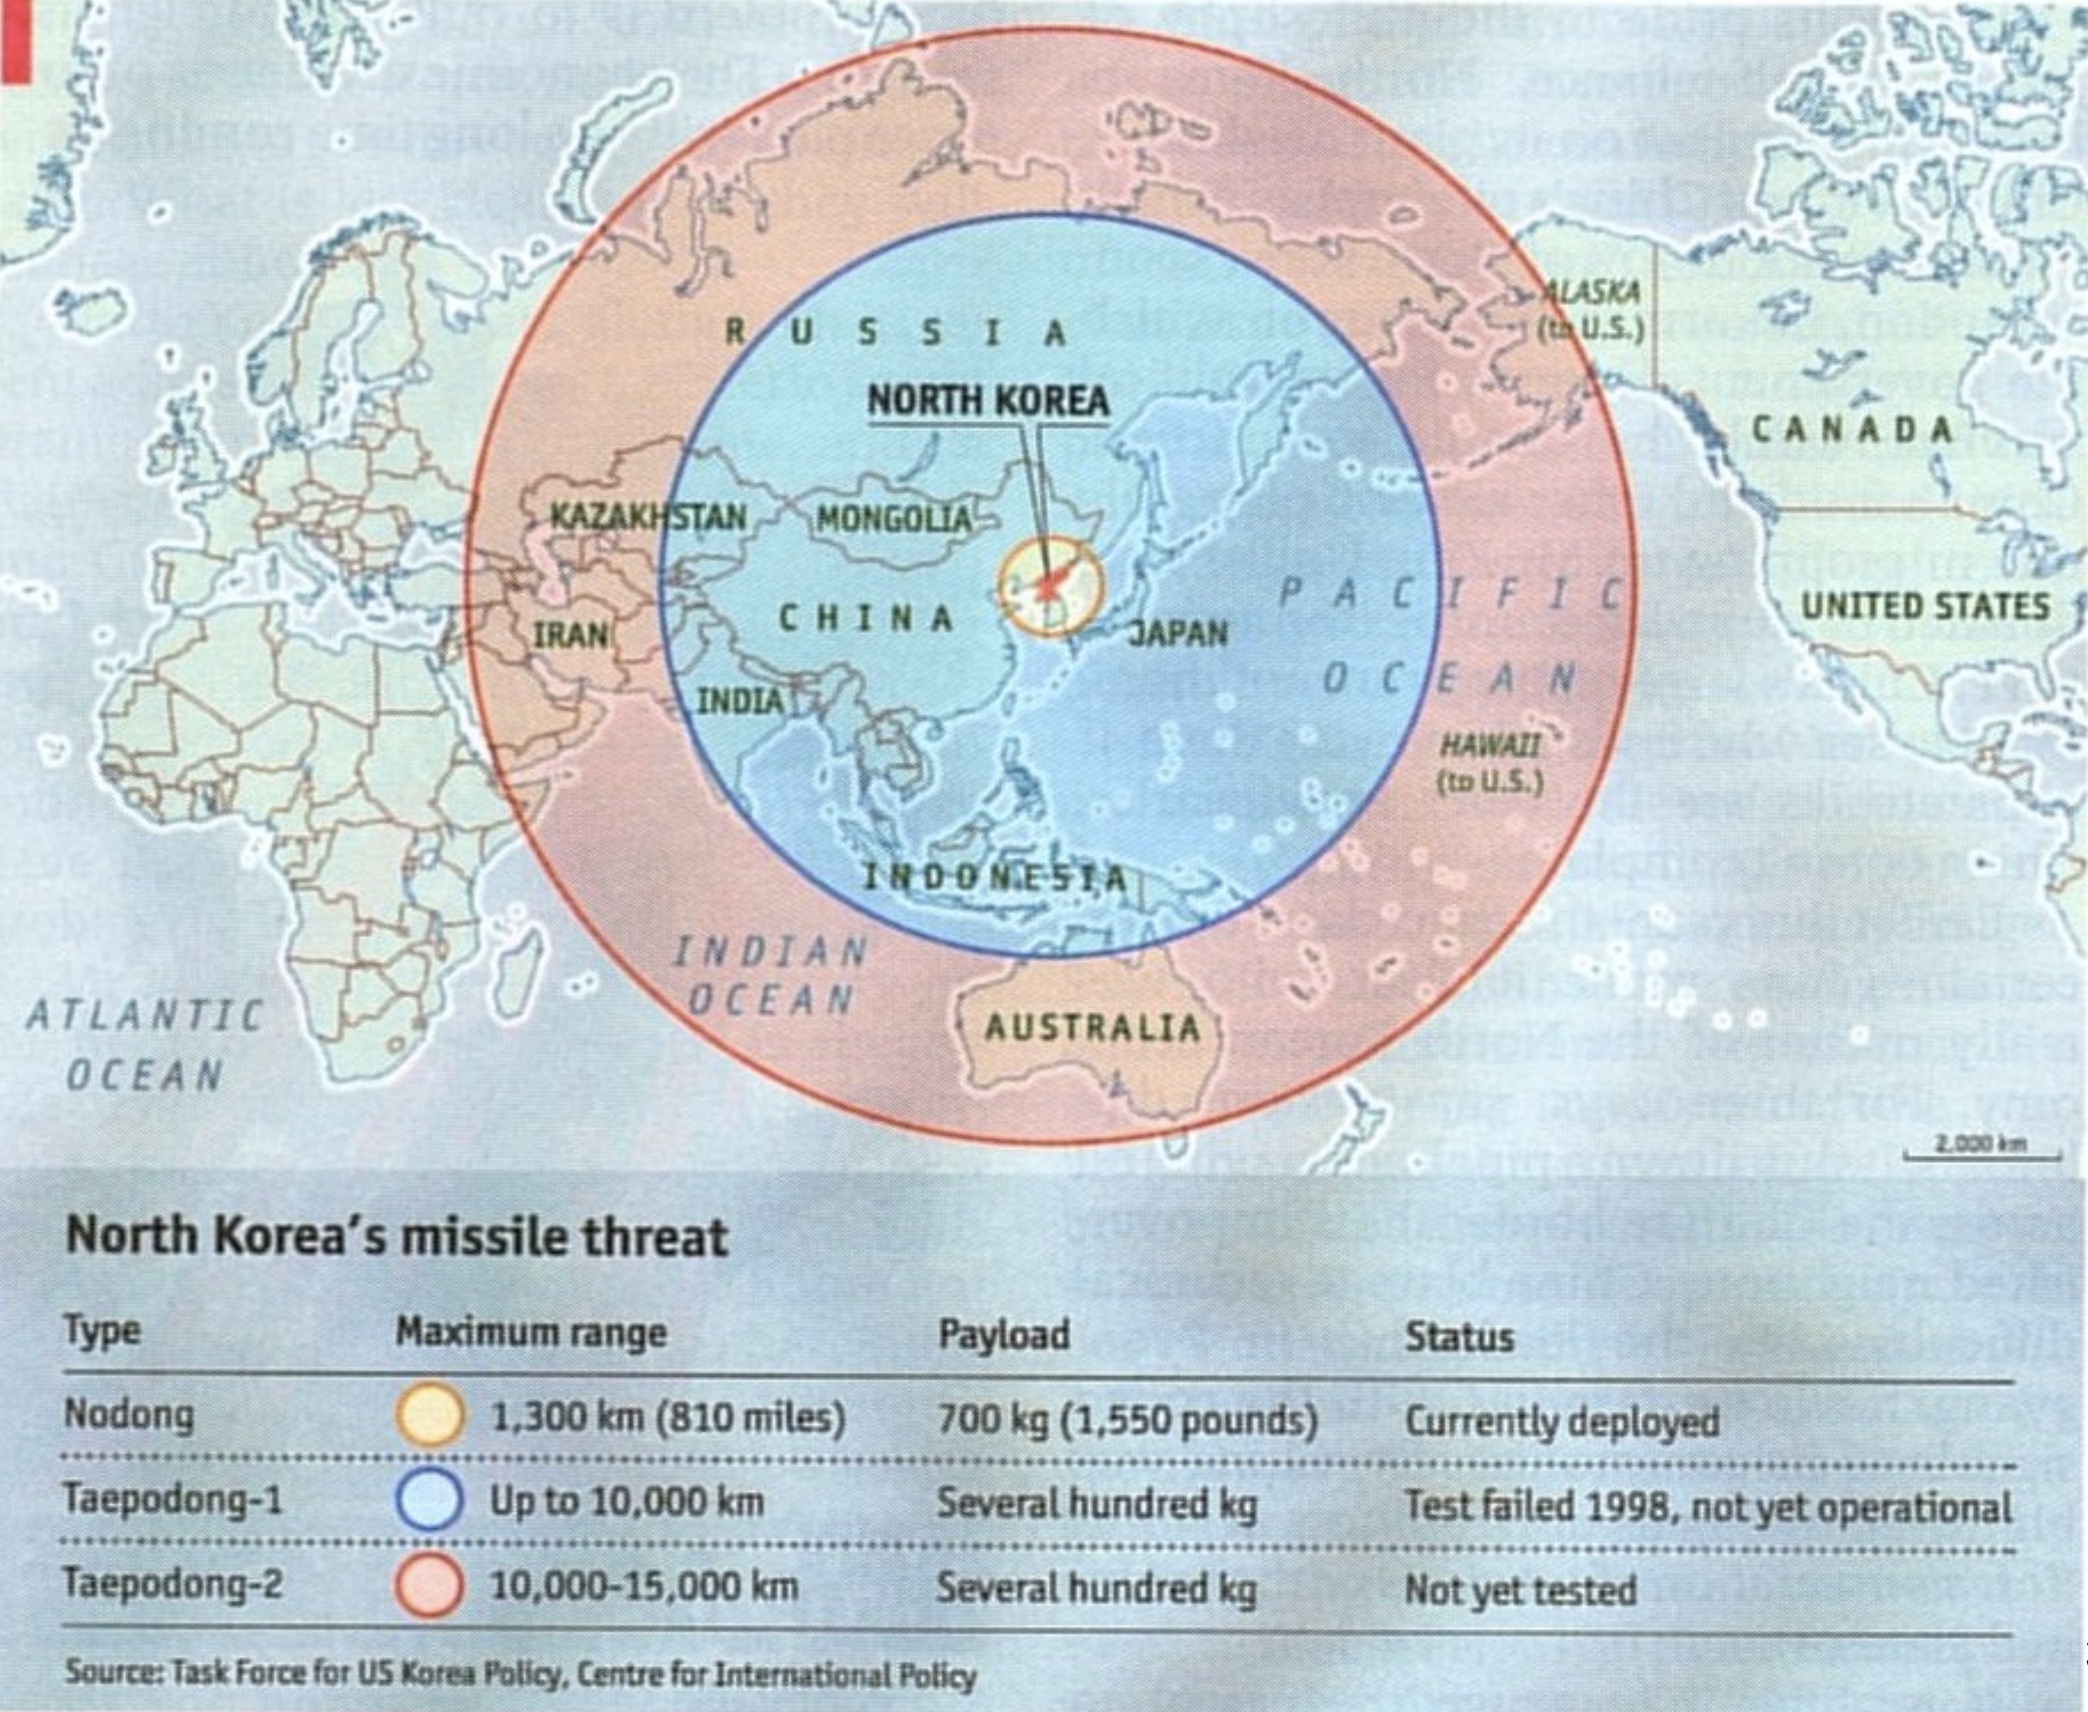 A world map in the Mercator projection showing concentric circles around North Korea